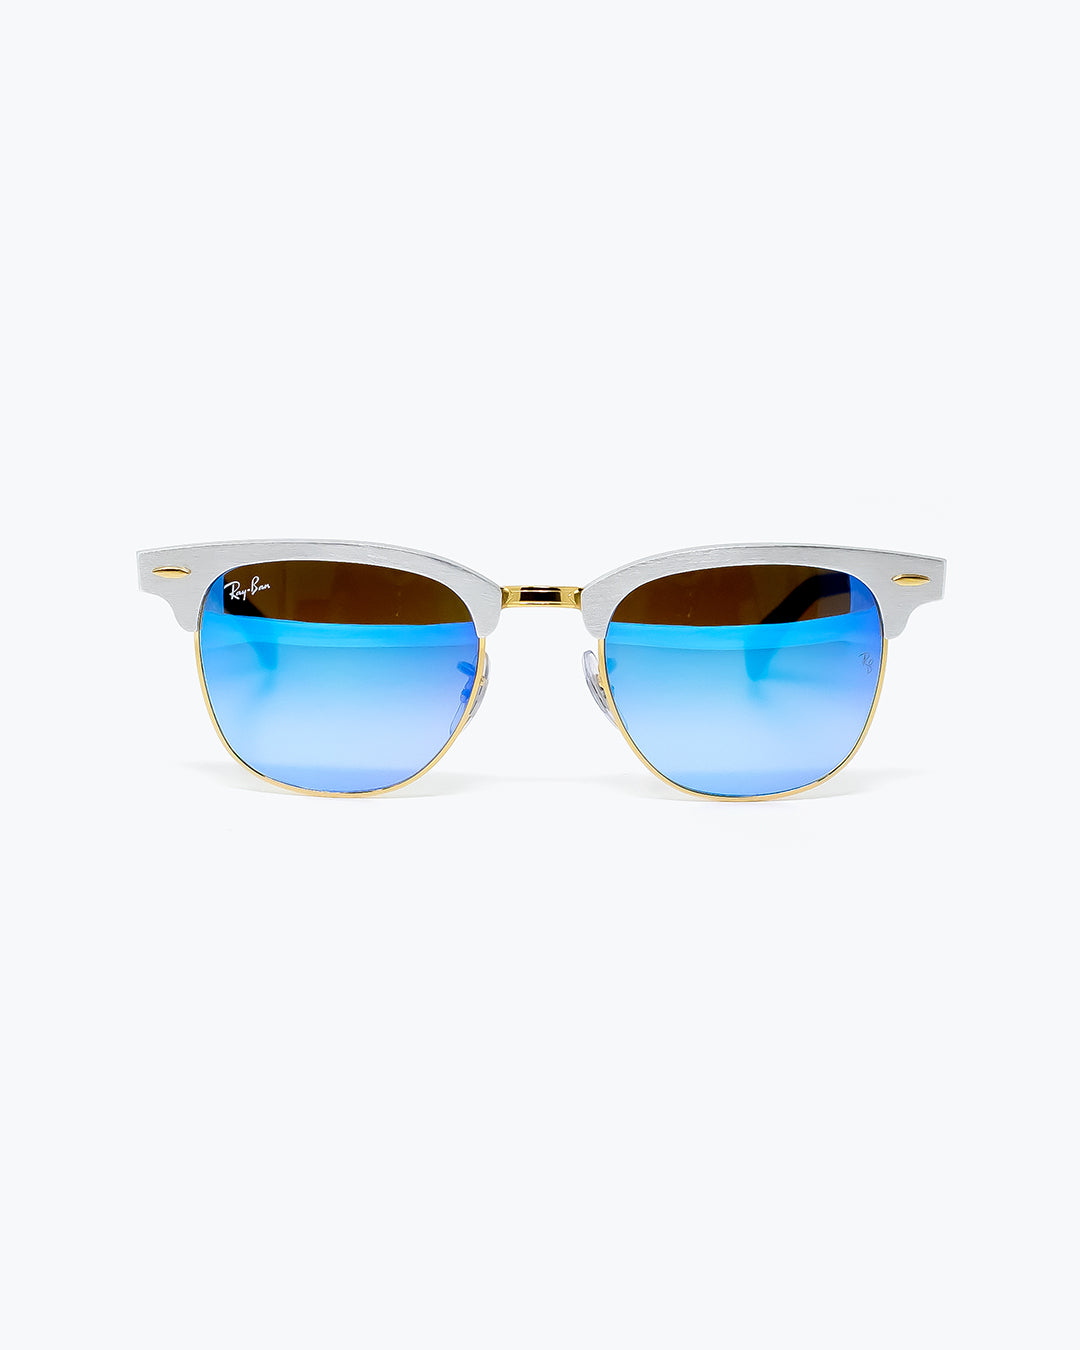 Ray Ban Clubmaster Aluminum - Model RB3507